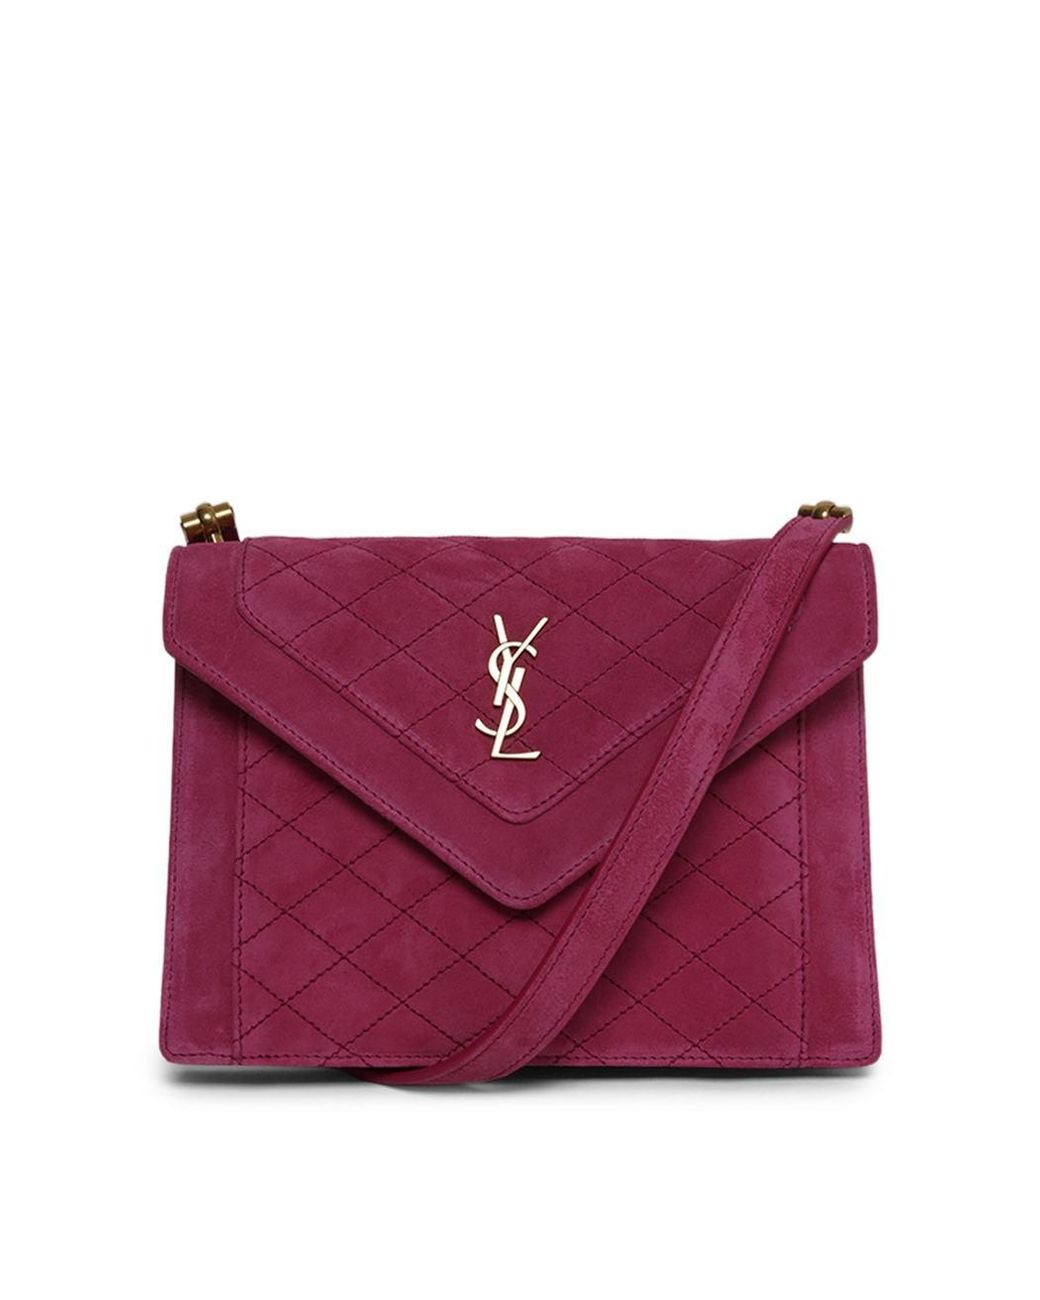 Saint Laurent Gaby Mini Satchel Bag In Quilted Lambskin Leather in ...